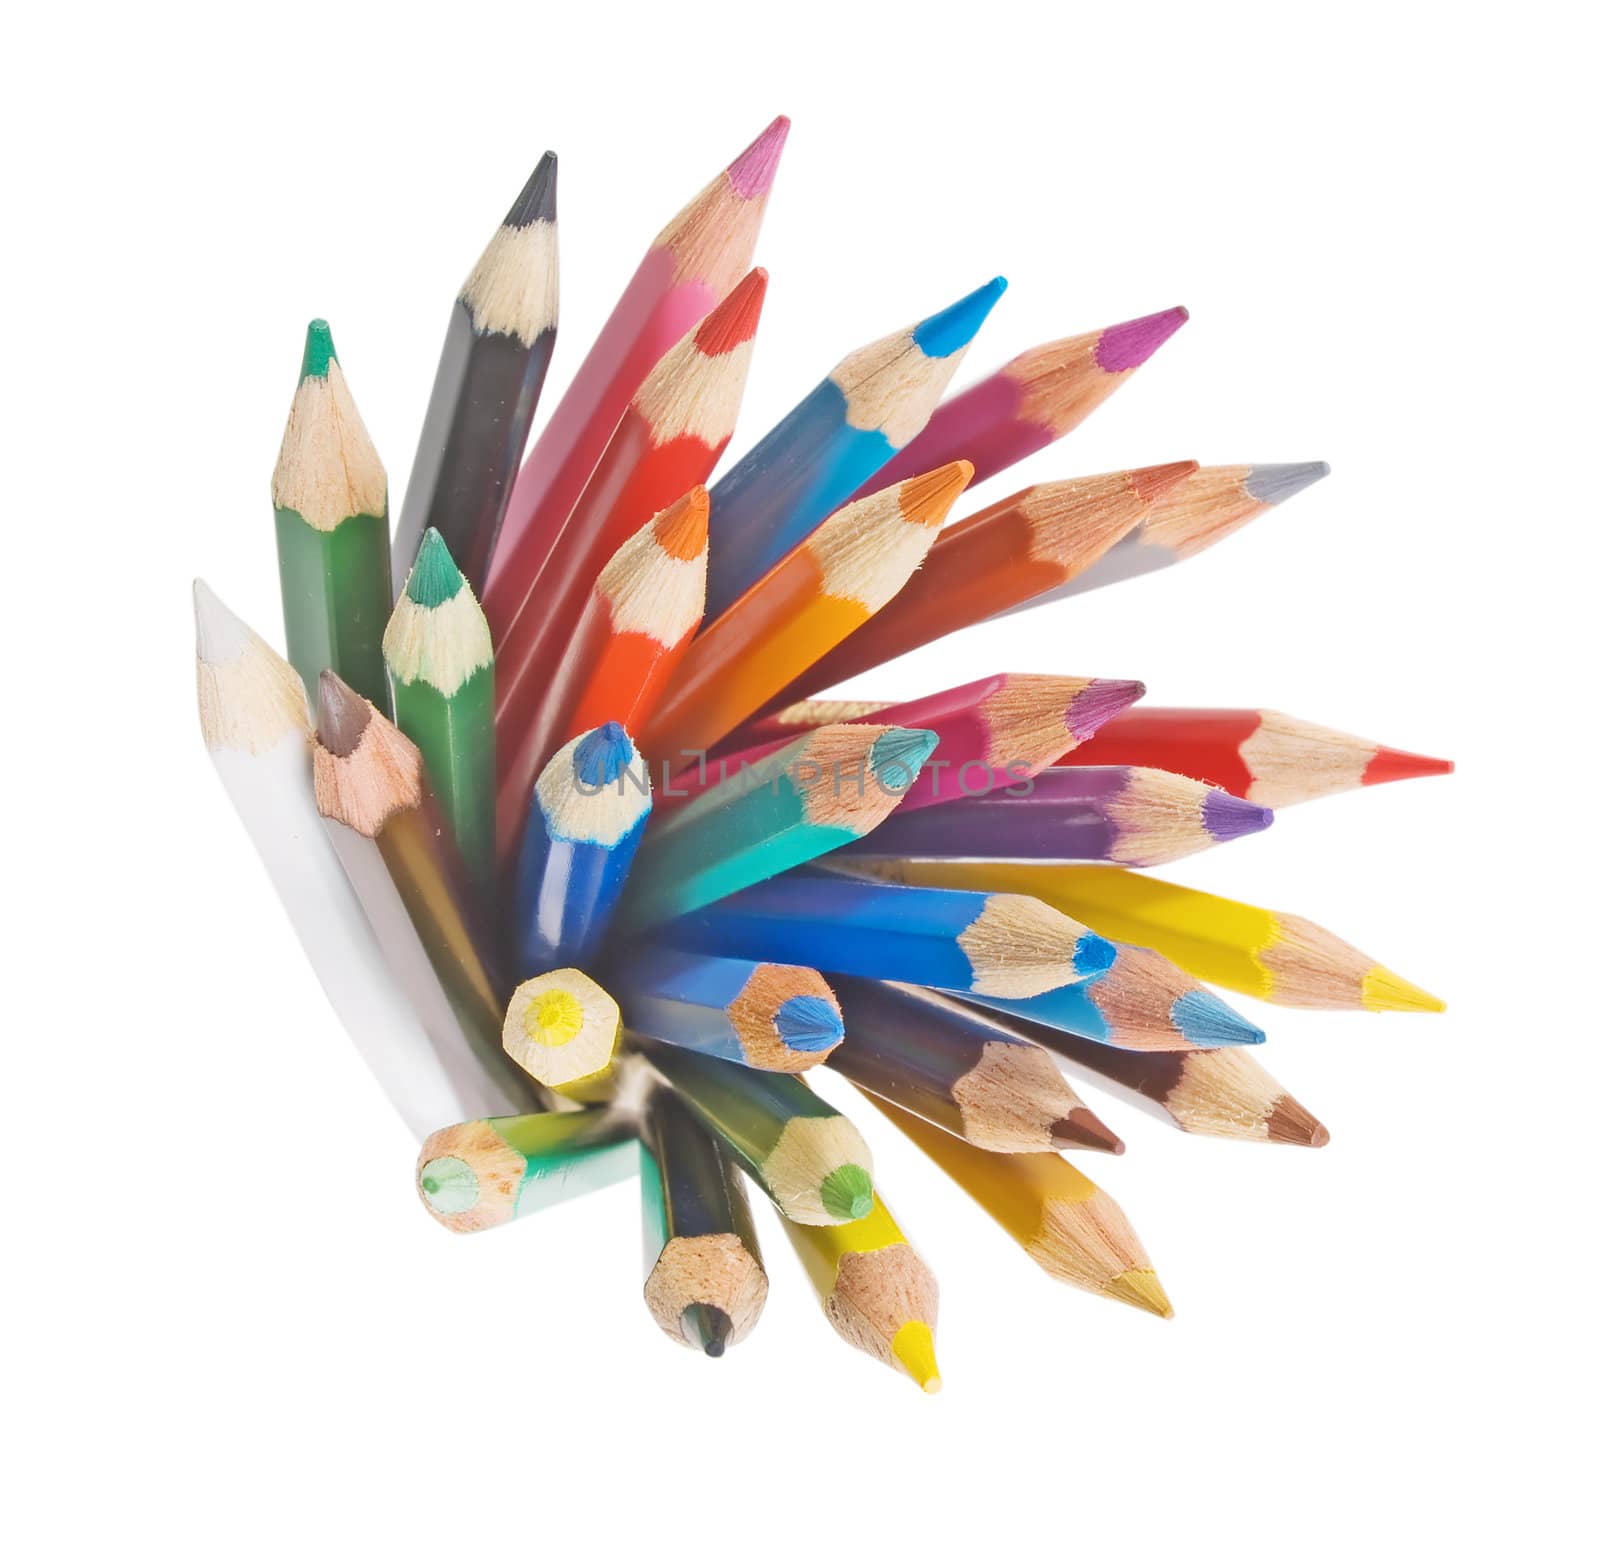 Group of colored pencils by BIG_TAU